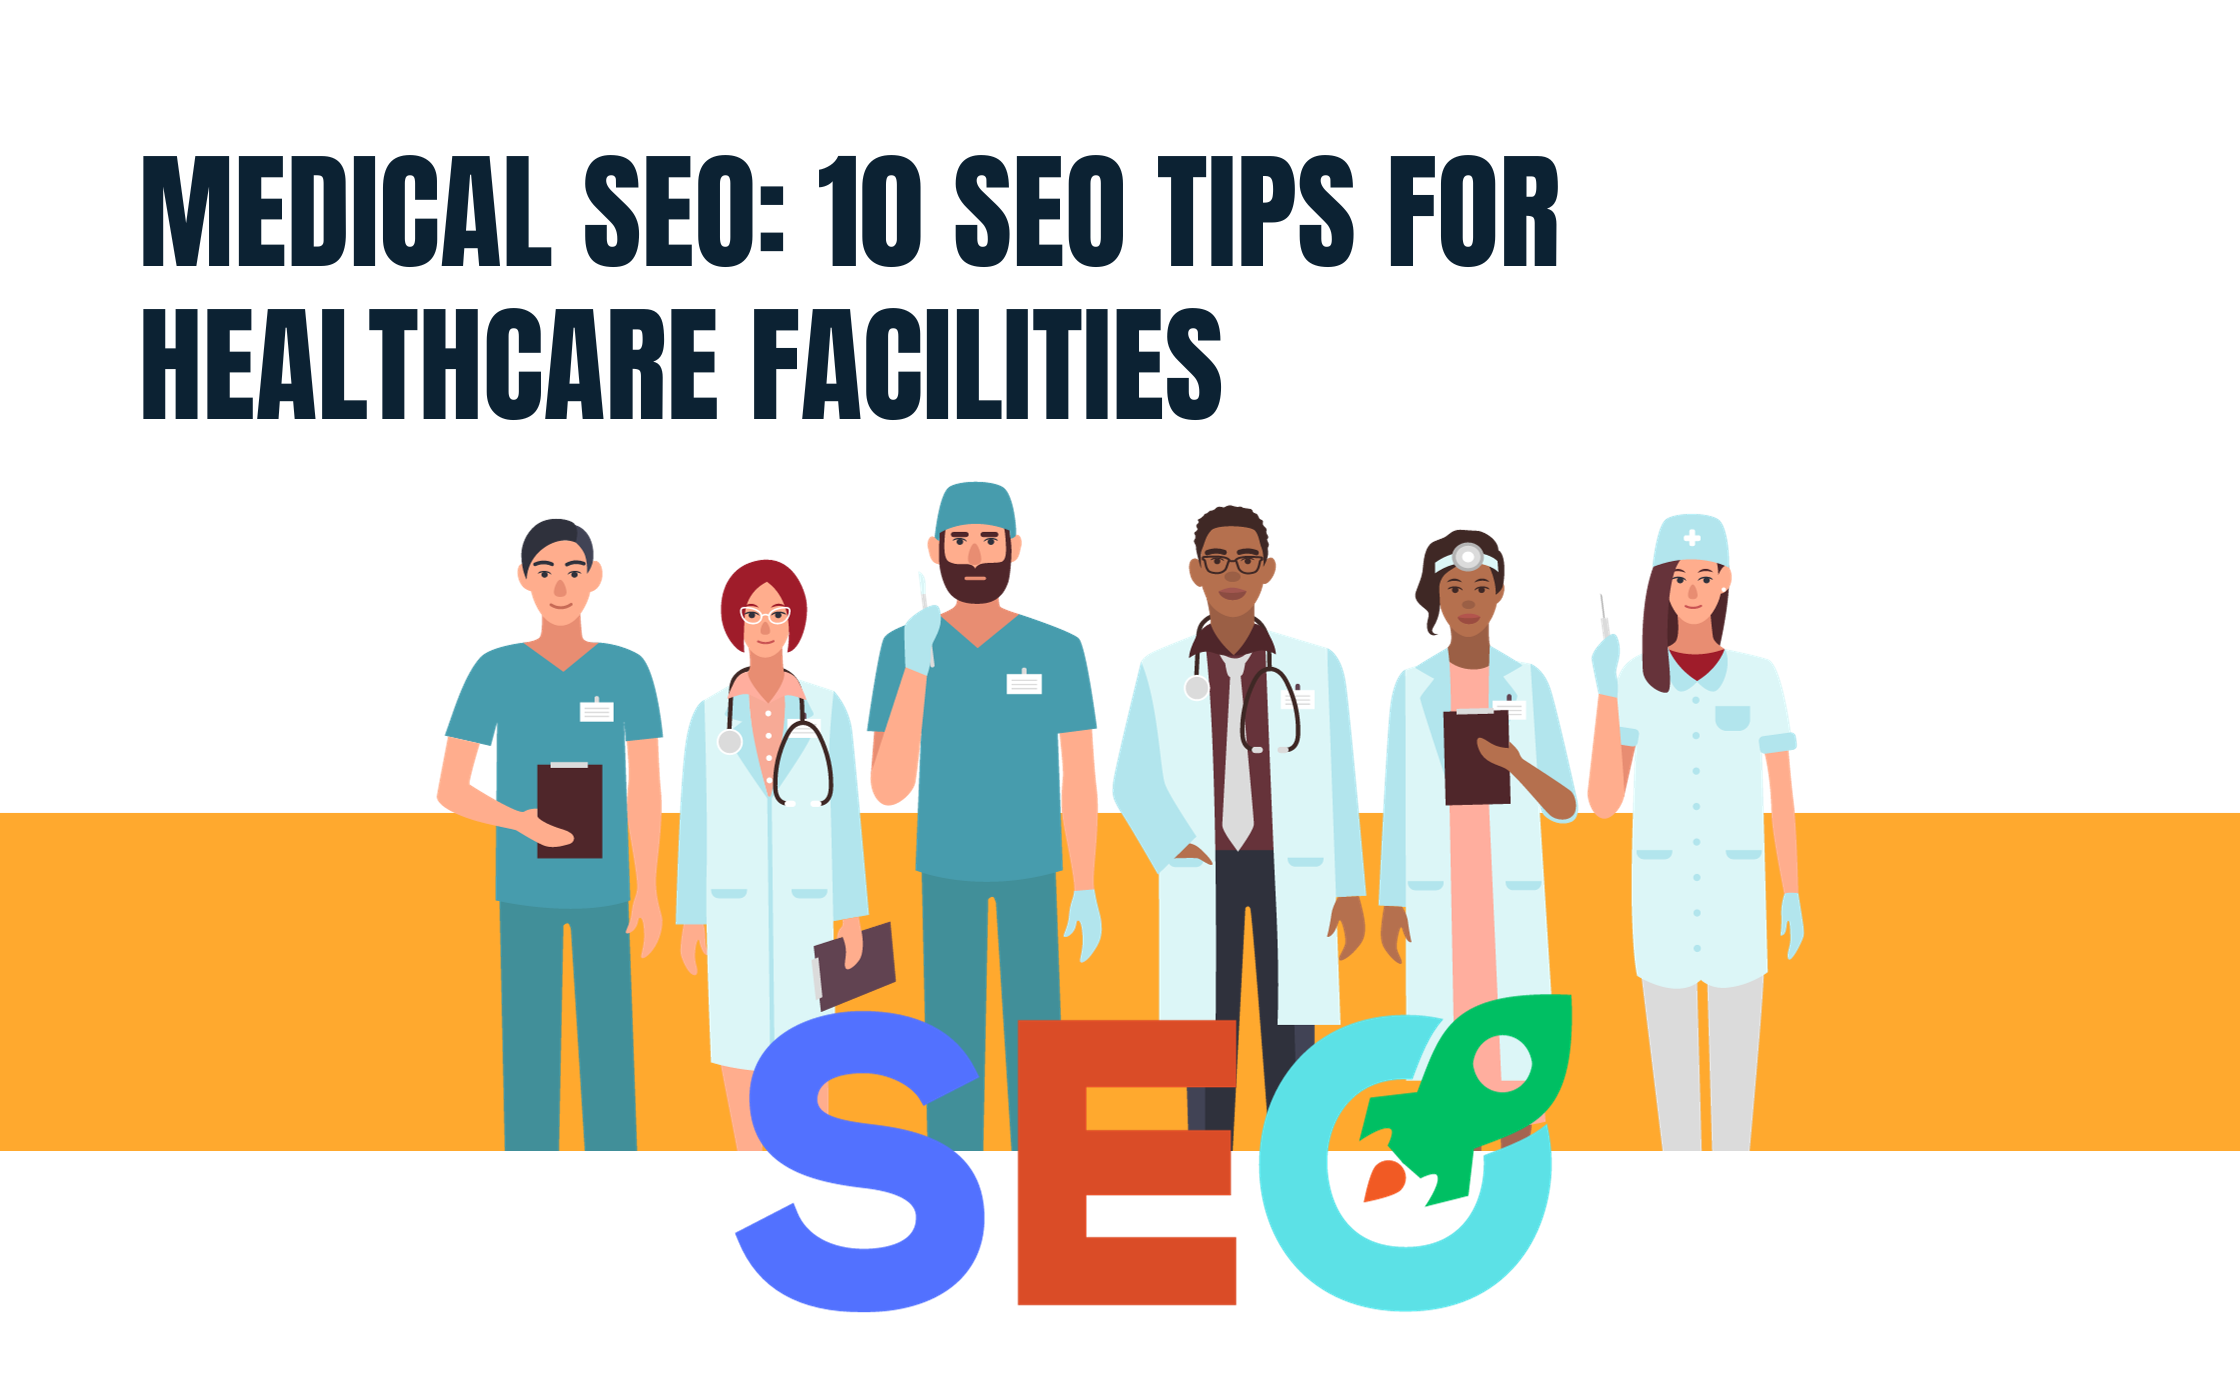 Healthcare SEO: 10 SEO Tips for Medical Practices